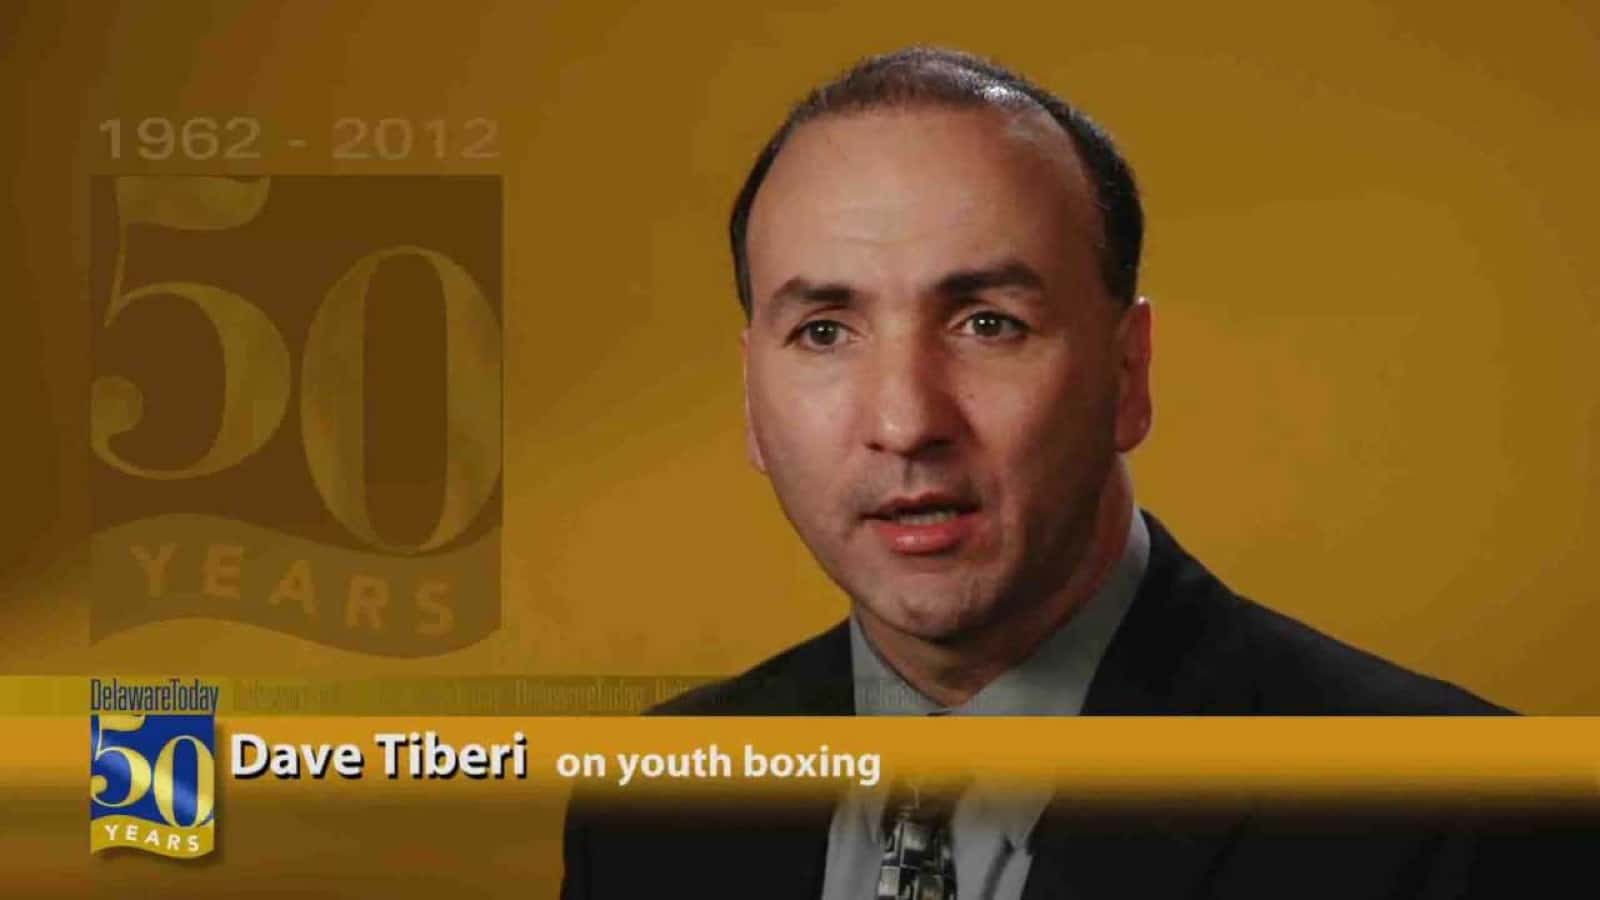 Exclusive: Dave Tiberi Speaks On The Upcoming 30th Anniversary Of The Controversial James Toney Fight